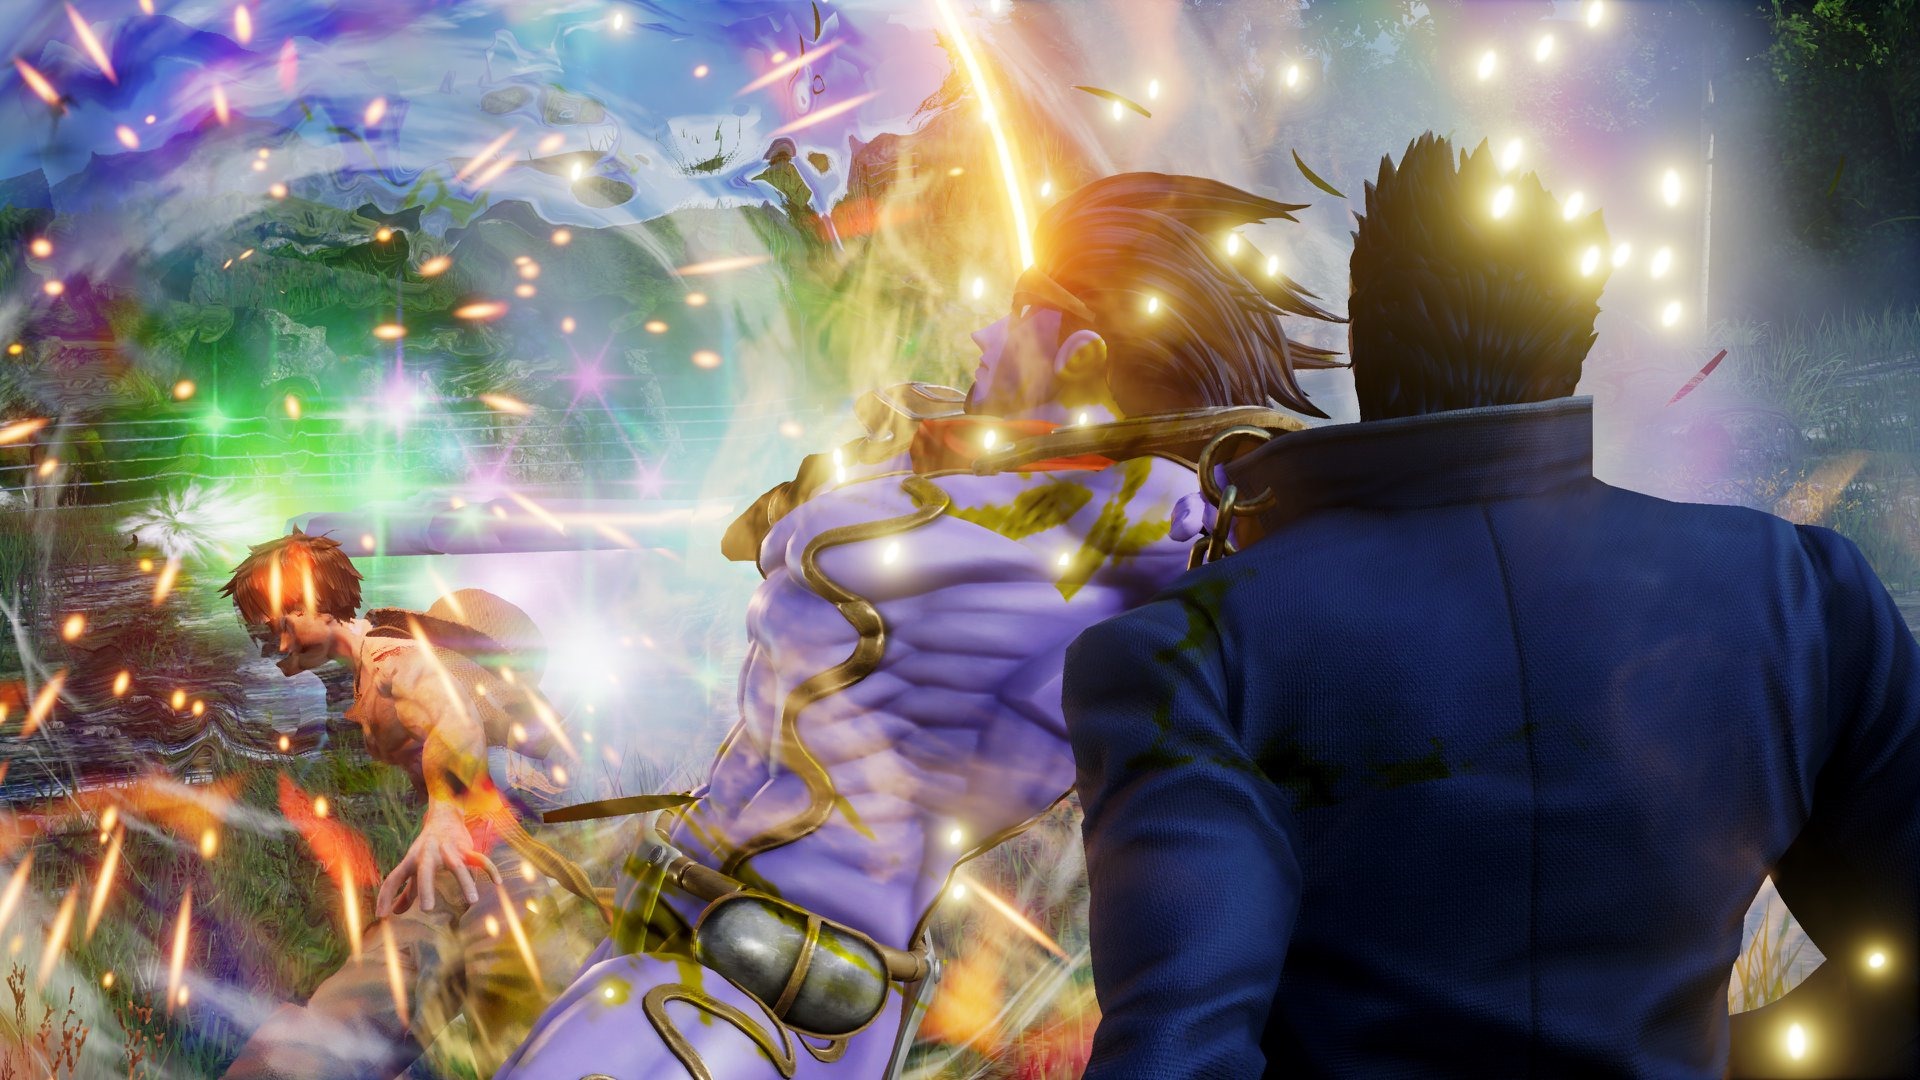 Jotaro Kujo screenshots, images and pictures - Giant Bomb